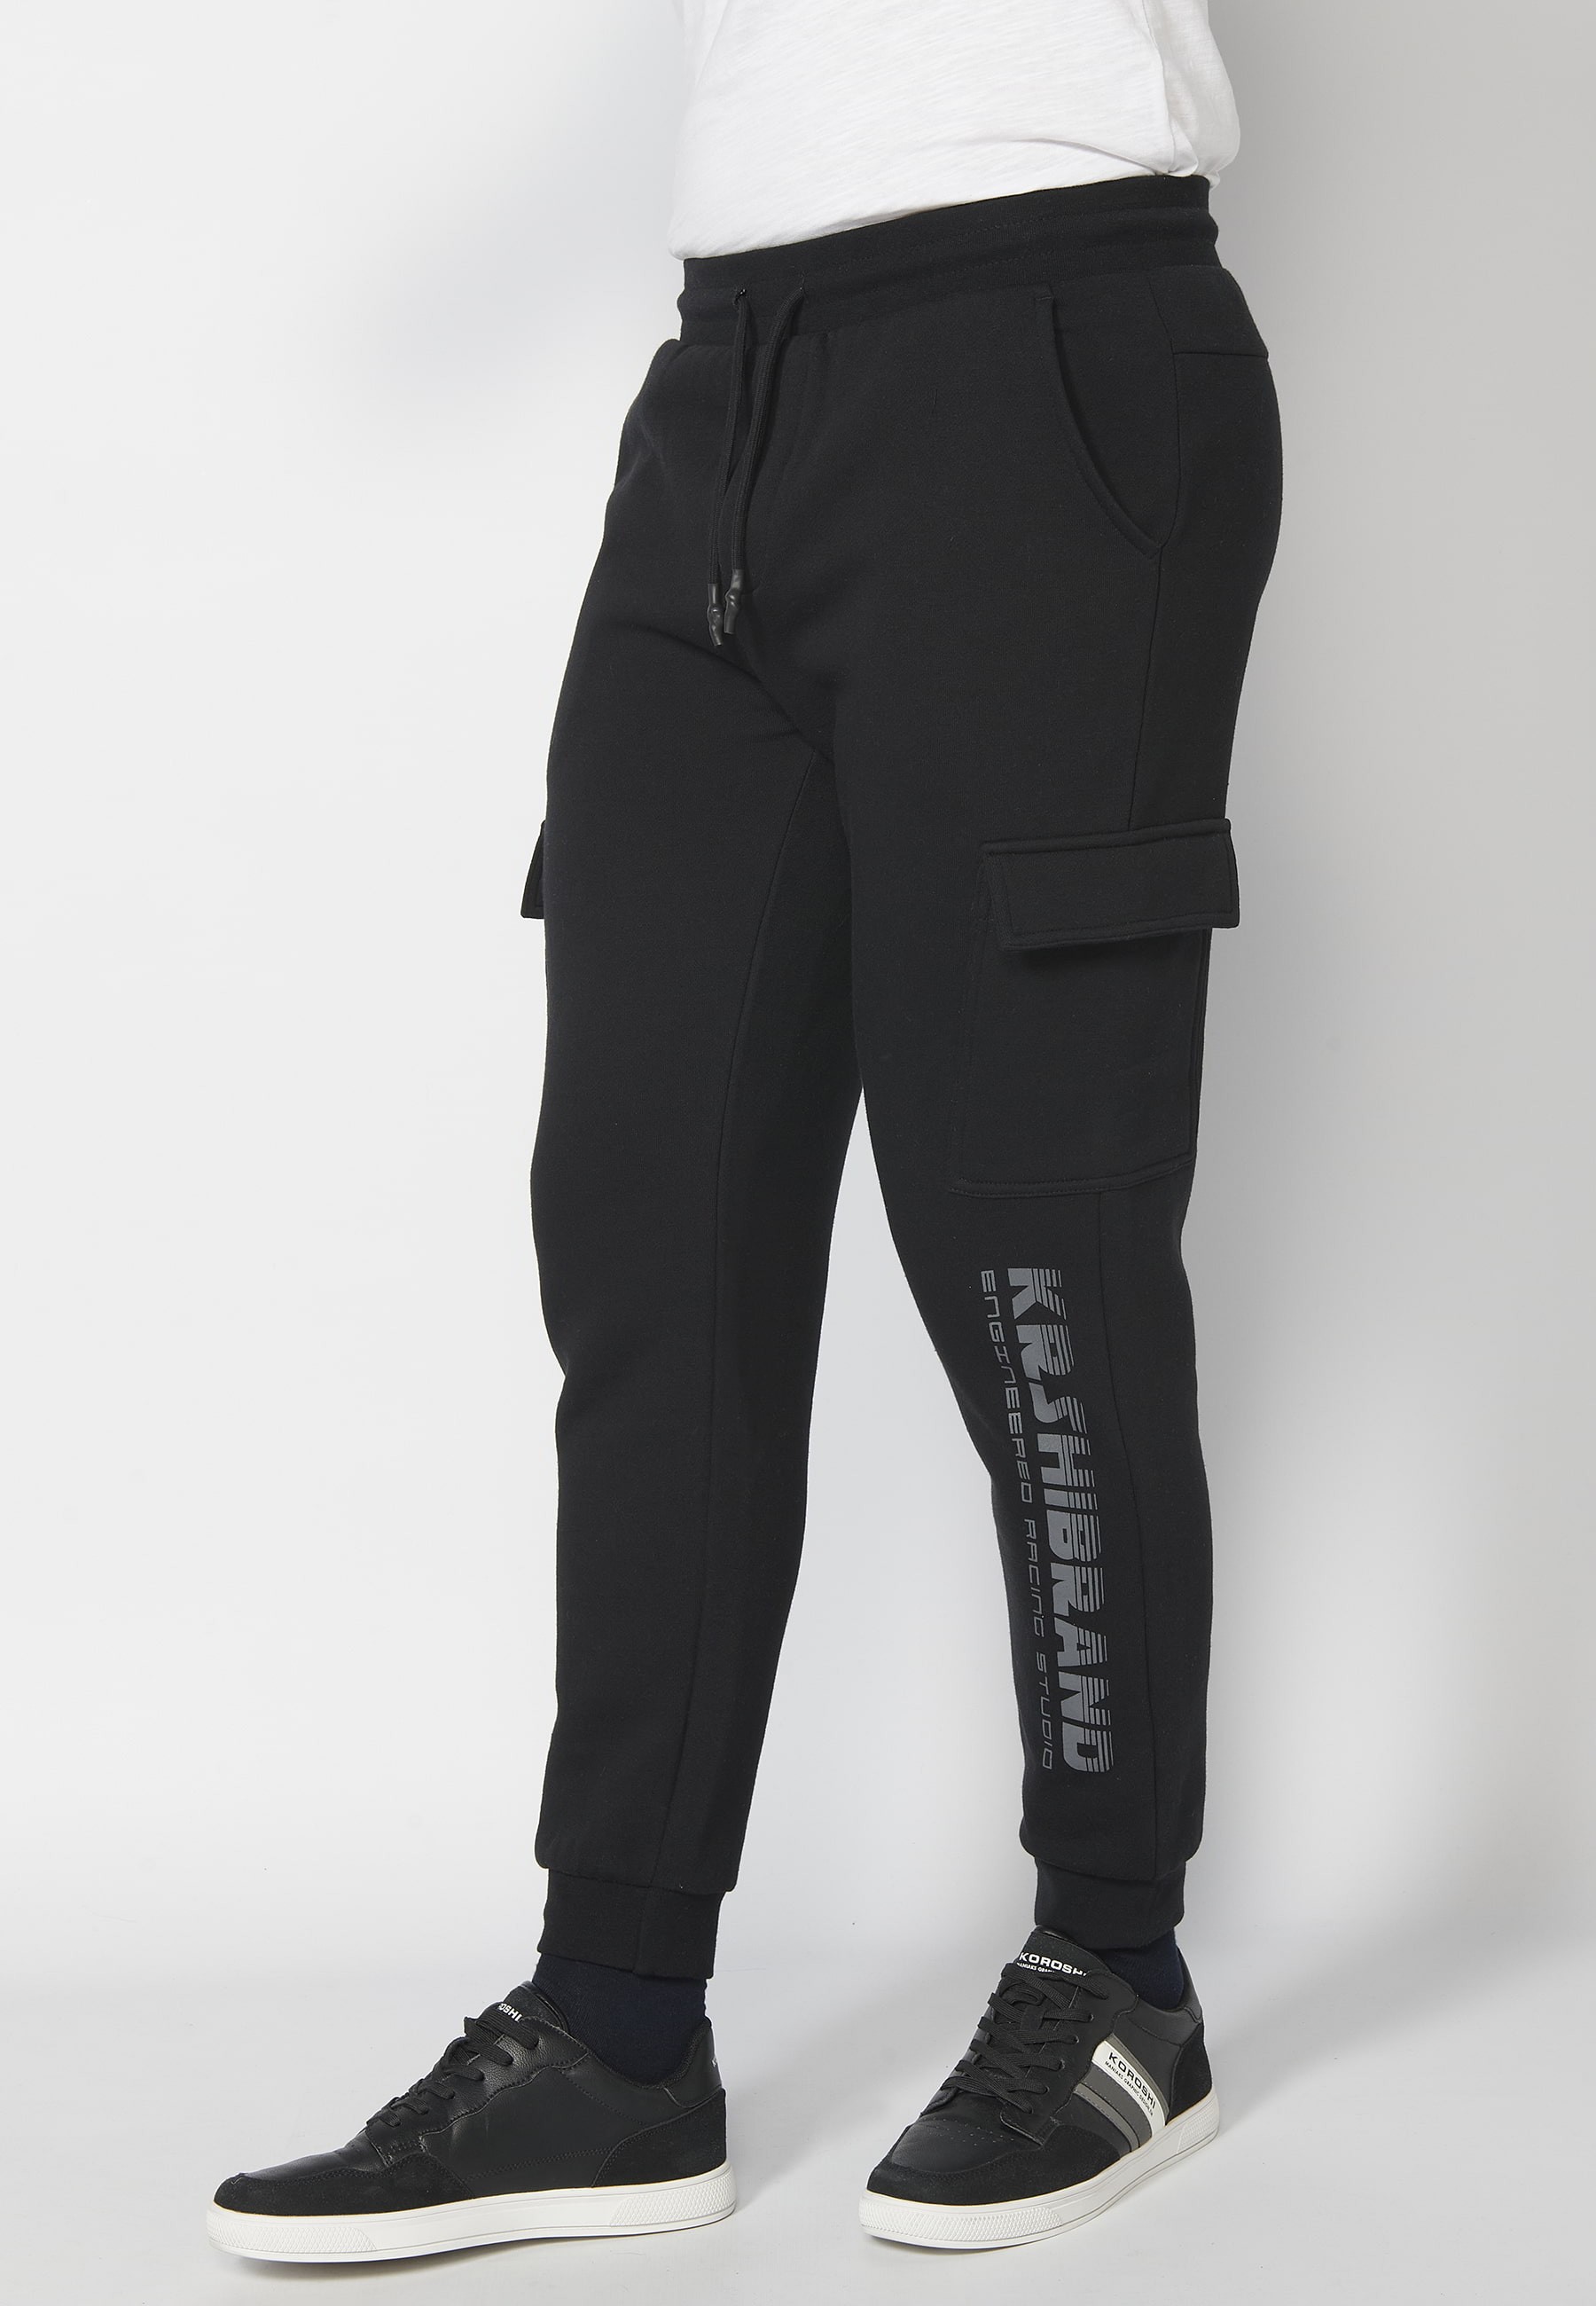 Long jogger pants with adjustable elastic waist and side pockets in Black for Men